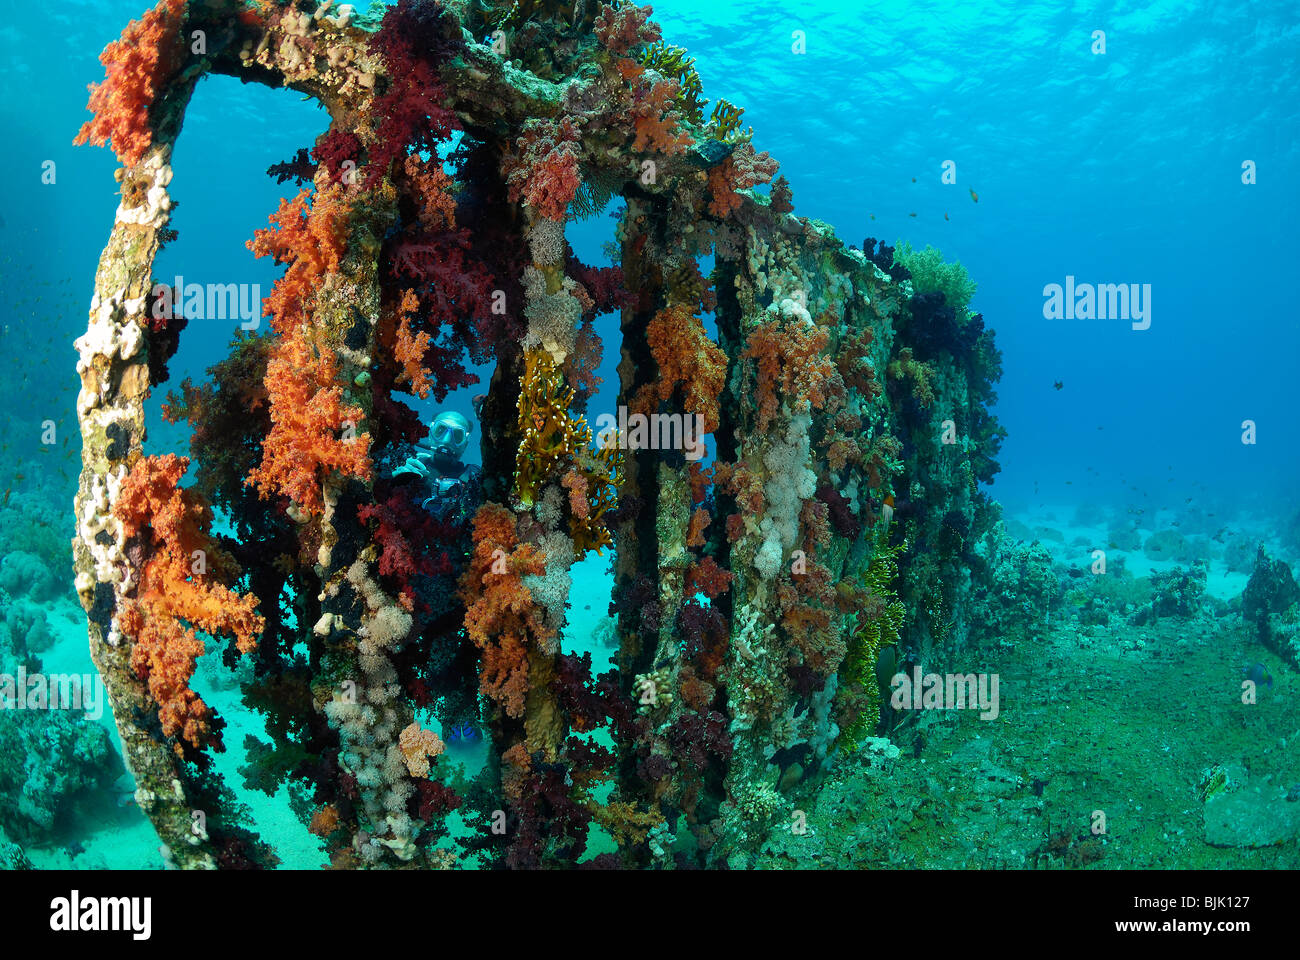 Wreck at Yolanda reef  in the Red Sea, off coast of Egypt. Stock Photo